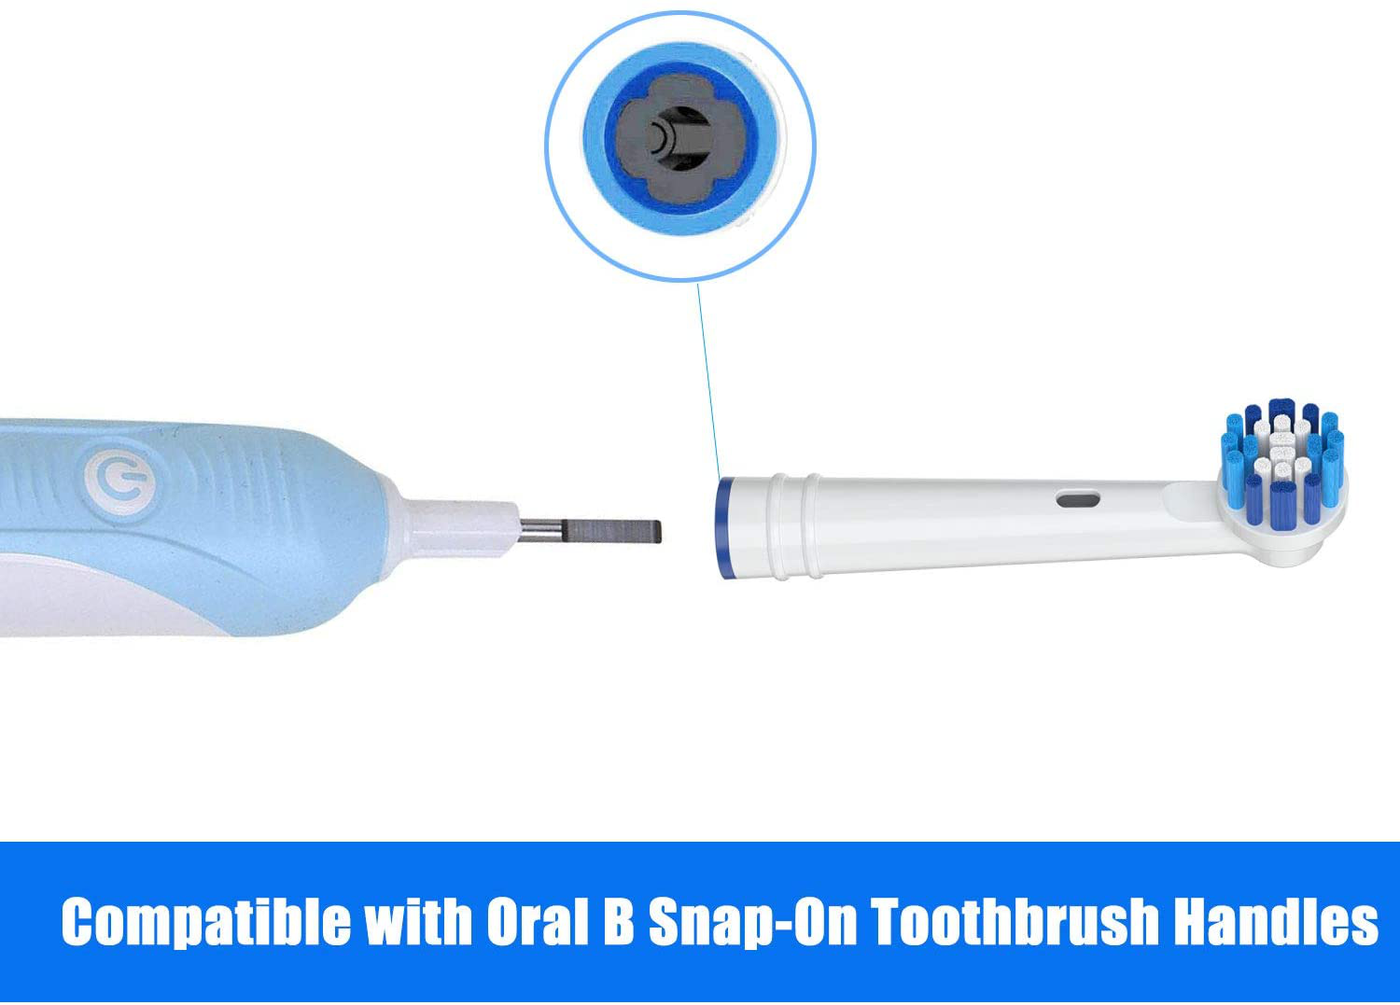 Replacement Toothbrush Heads for Oral-B, 4 Pack Replacement Heads Compatible with Oral B Braun Electric Toothbrush